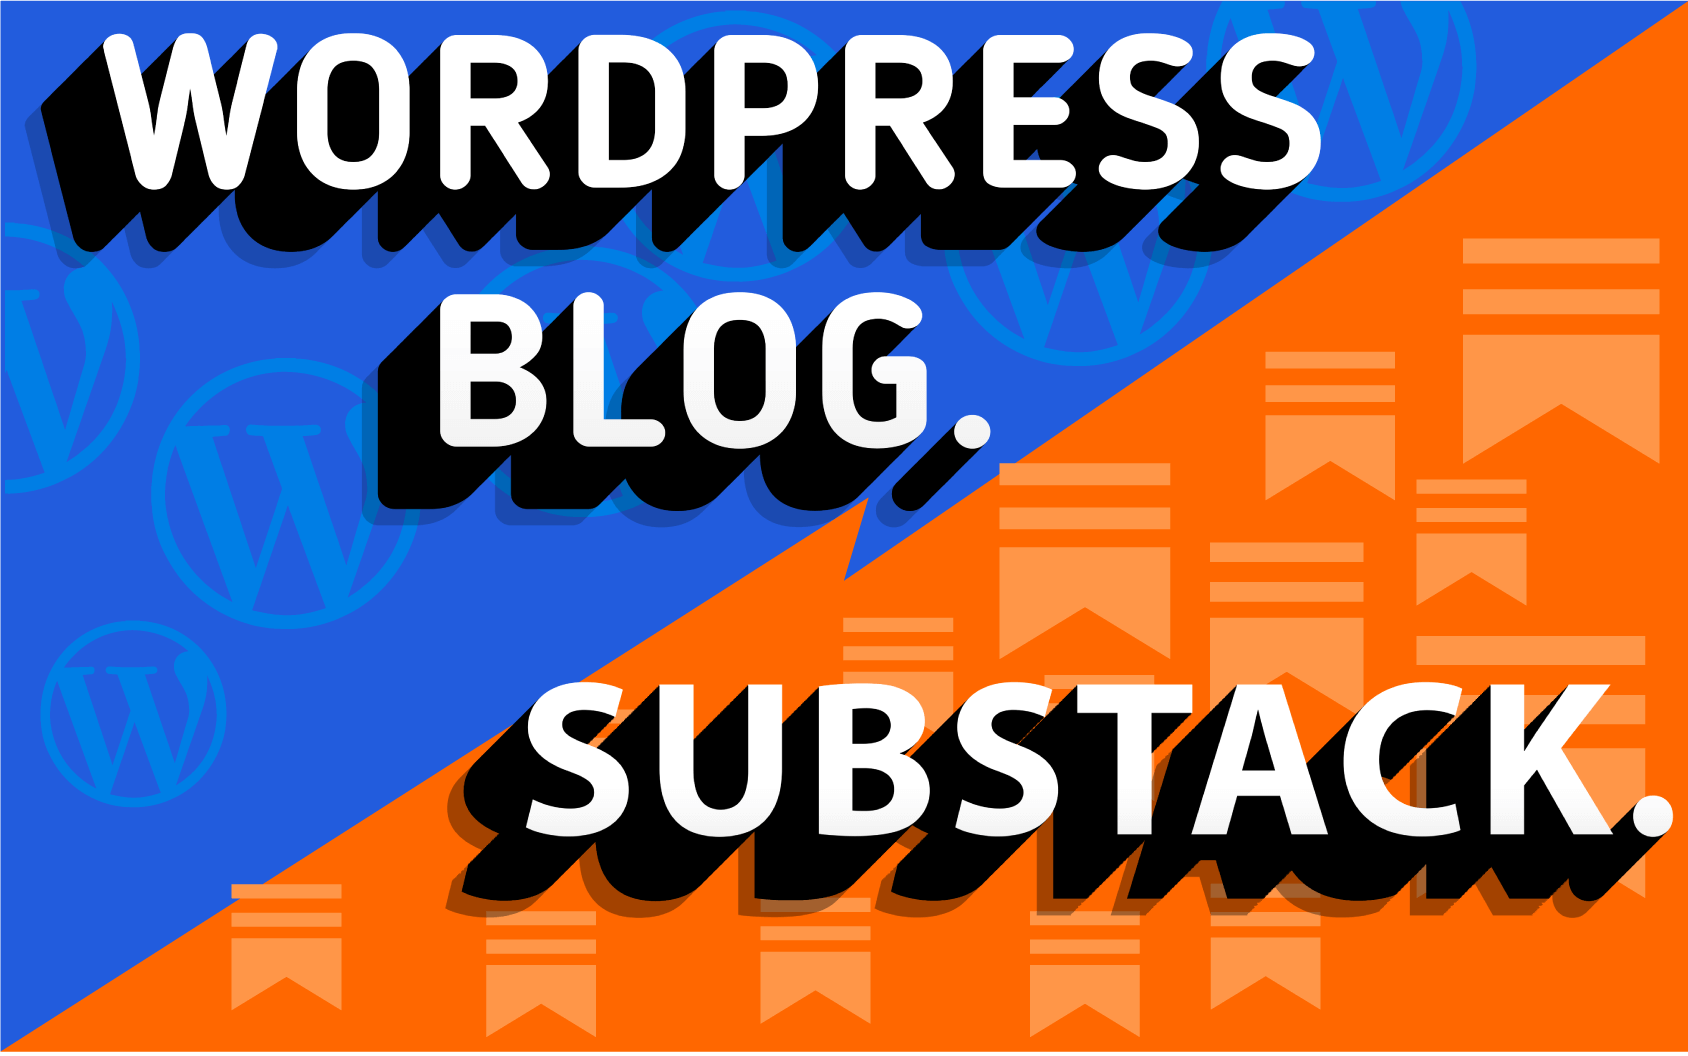 WordPress Blog vs Substack – How Do They Compare?